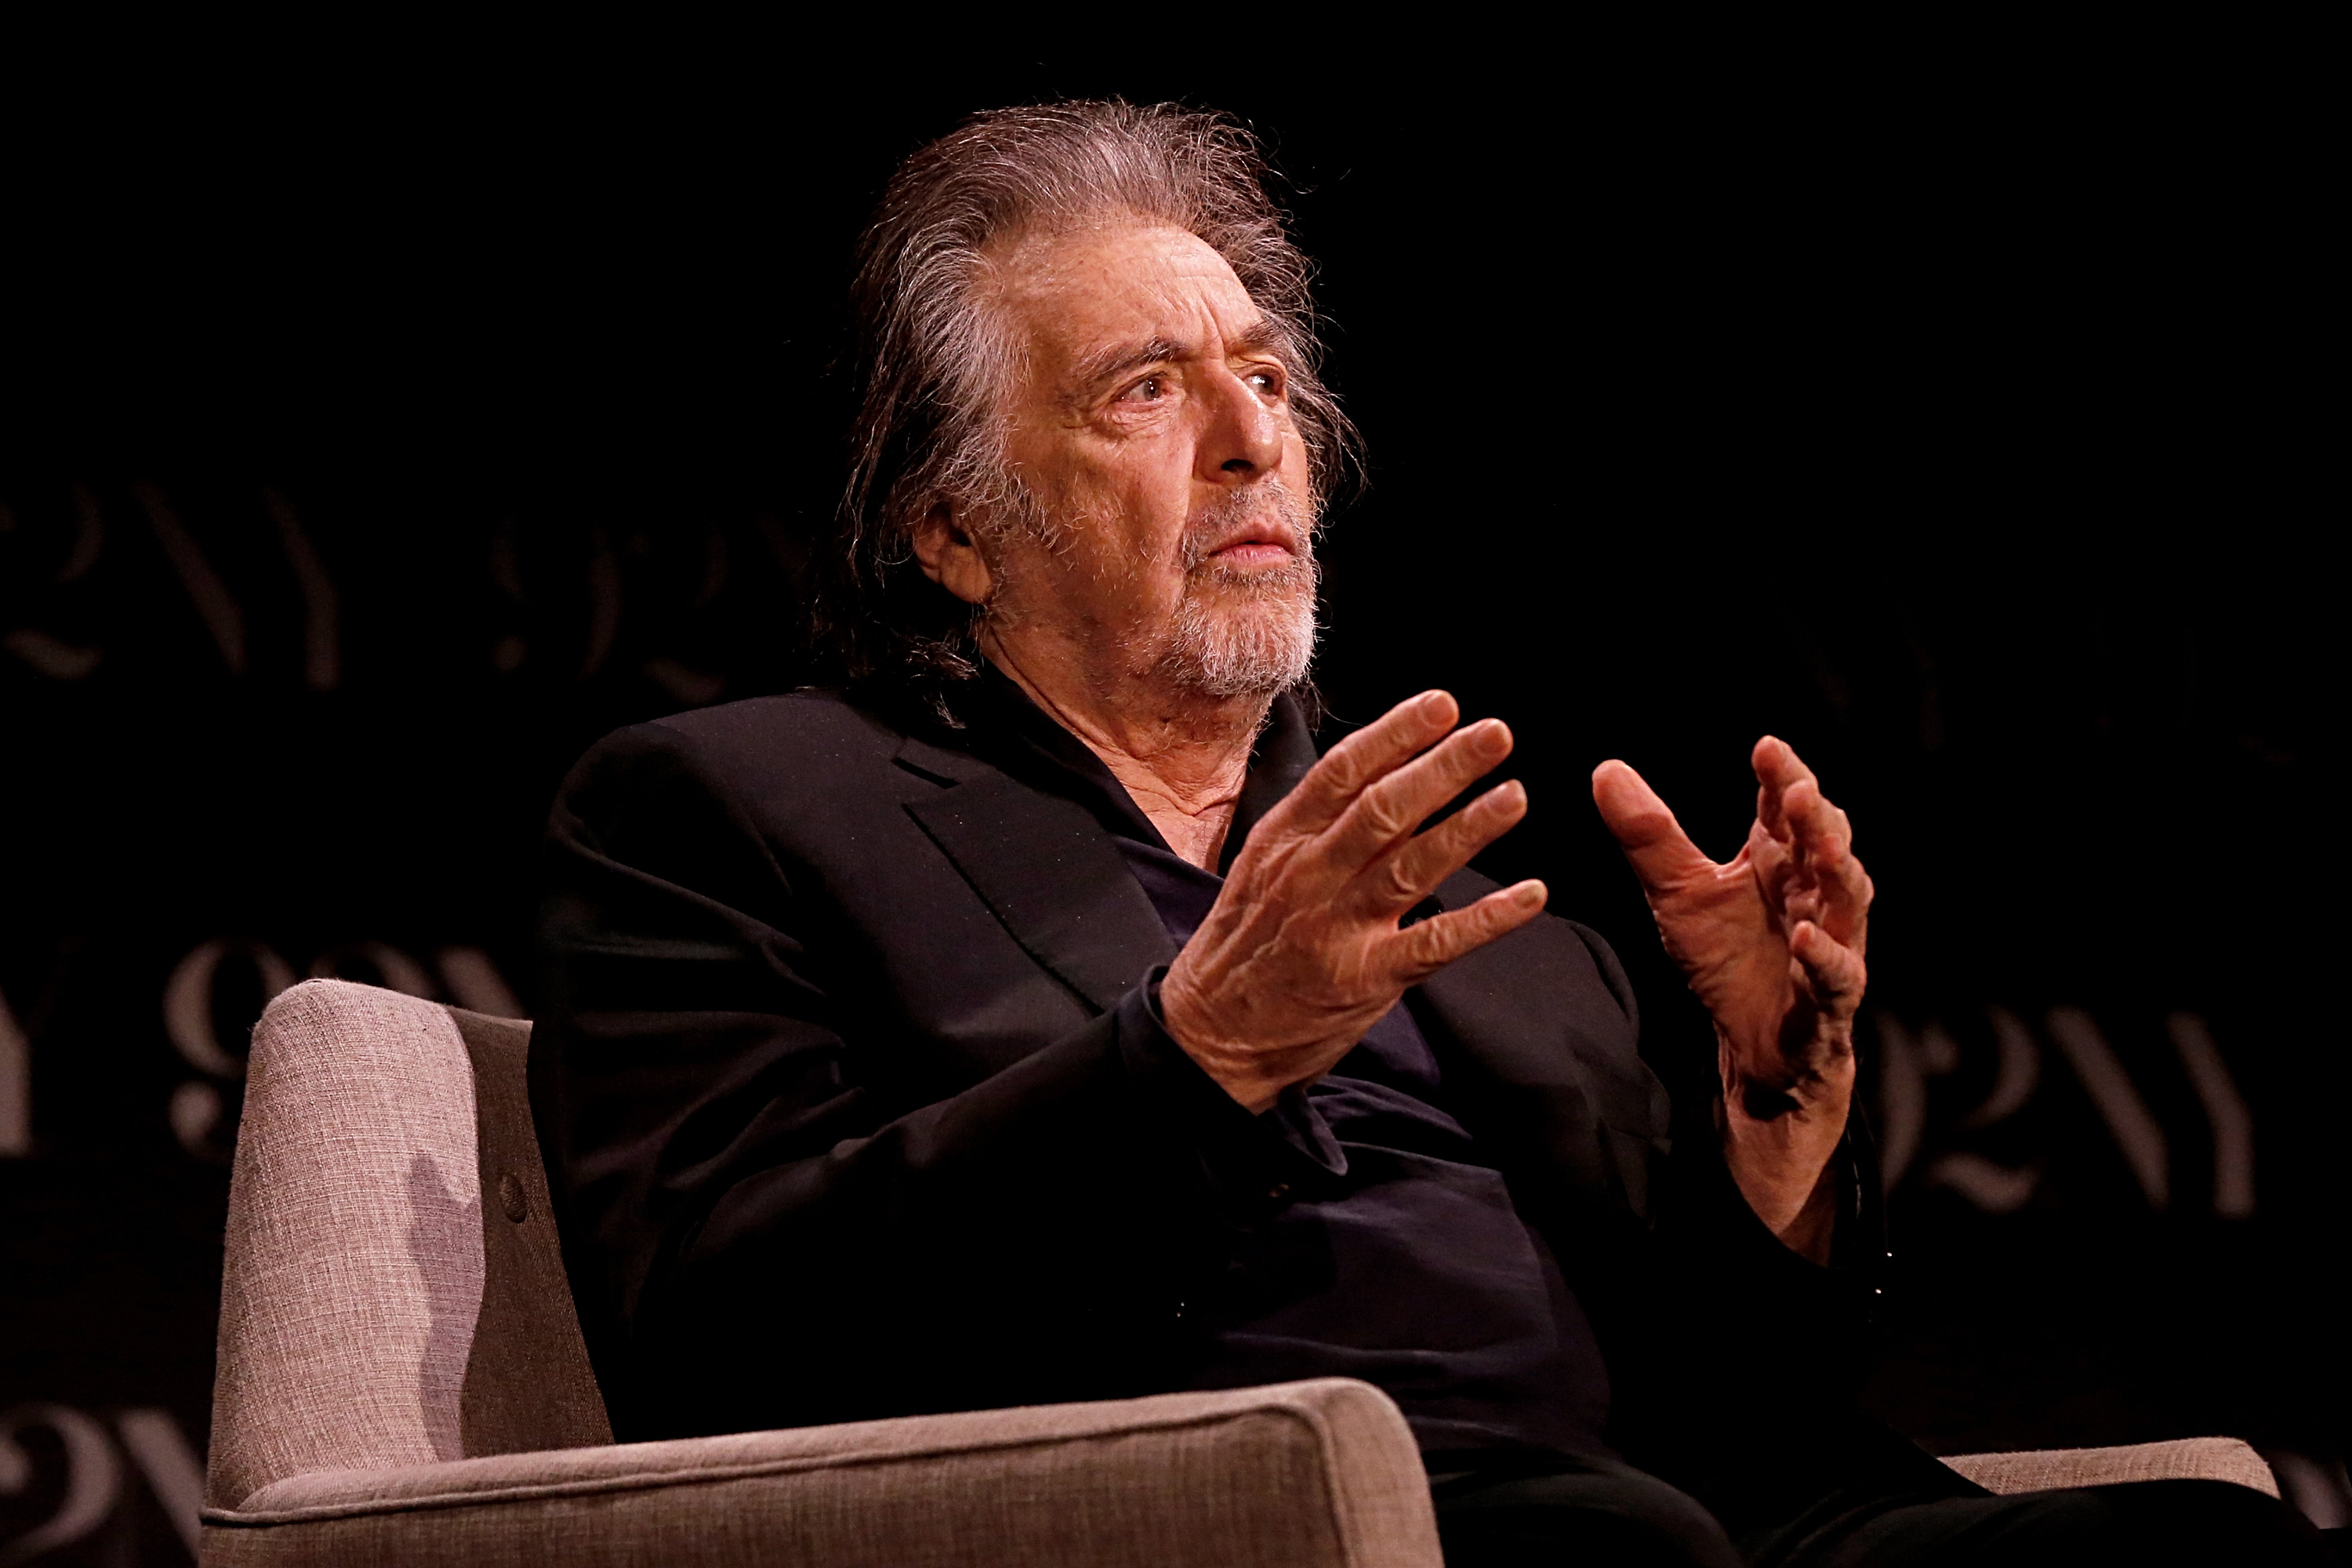 Al Pacino at The 92nd Street Y in conversation with David Rubenstein in New York, 2023 | Source: Getty Images